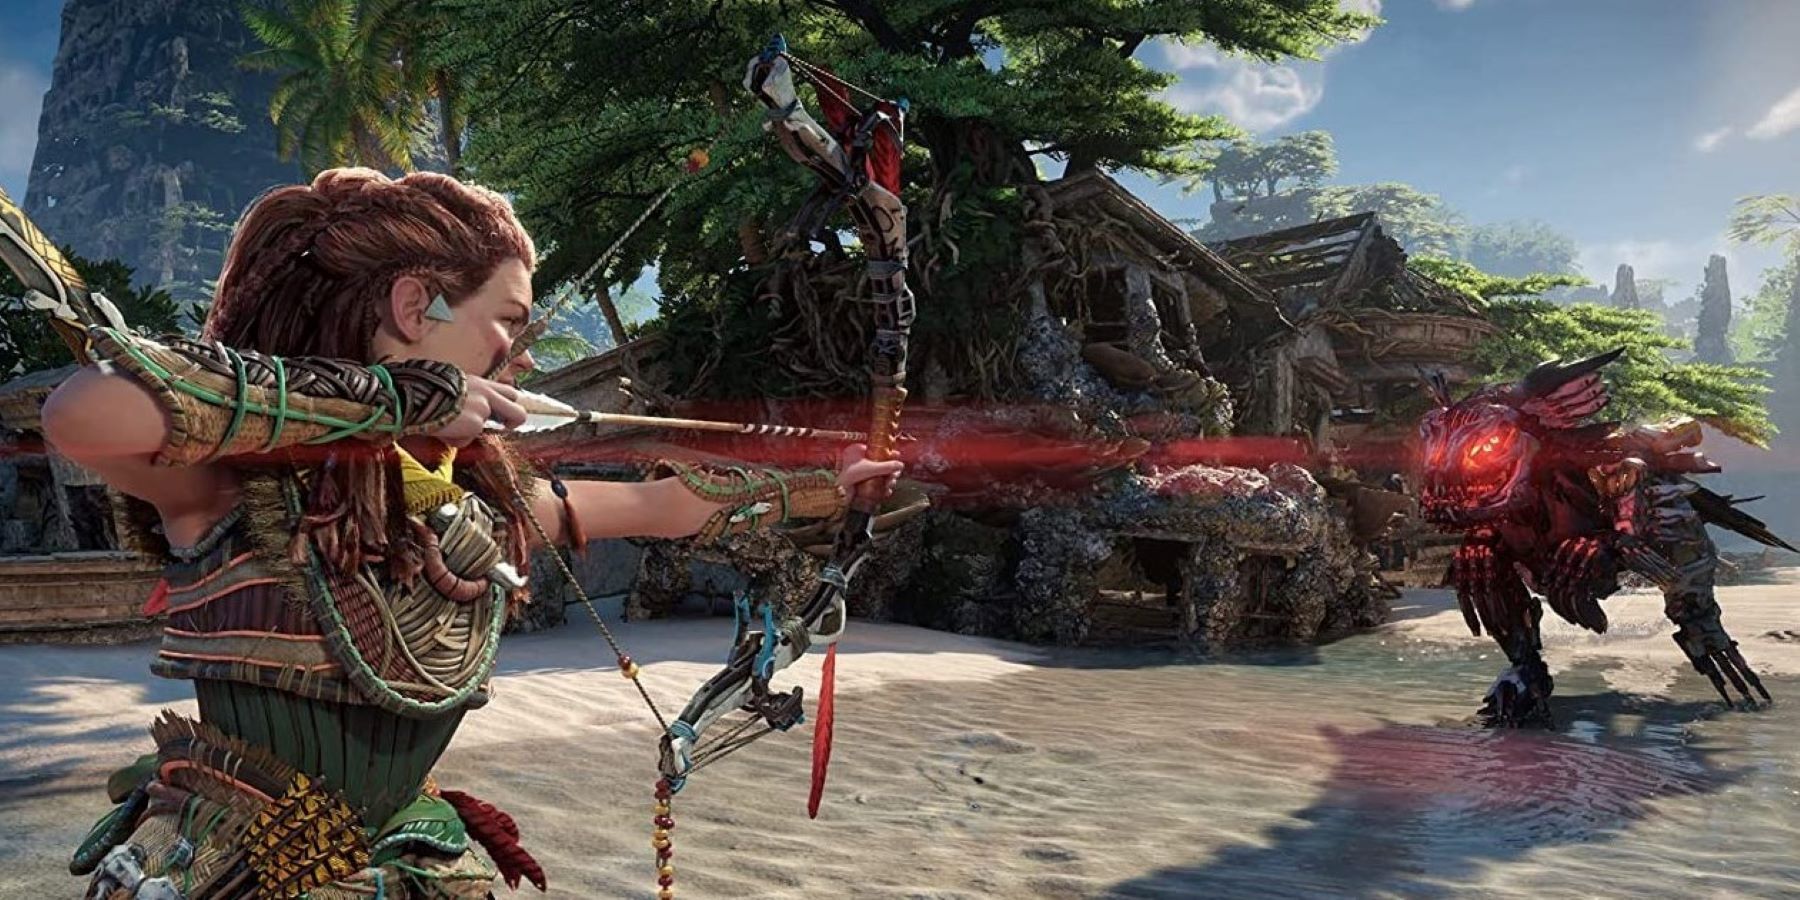 Aloy aiming her bow at a Clawstrider on a beach near some ruins and trees in Horizon Forbidden West